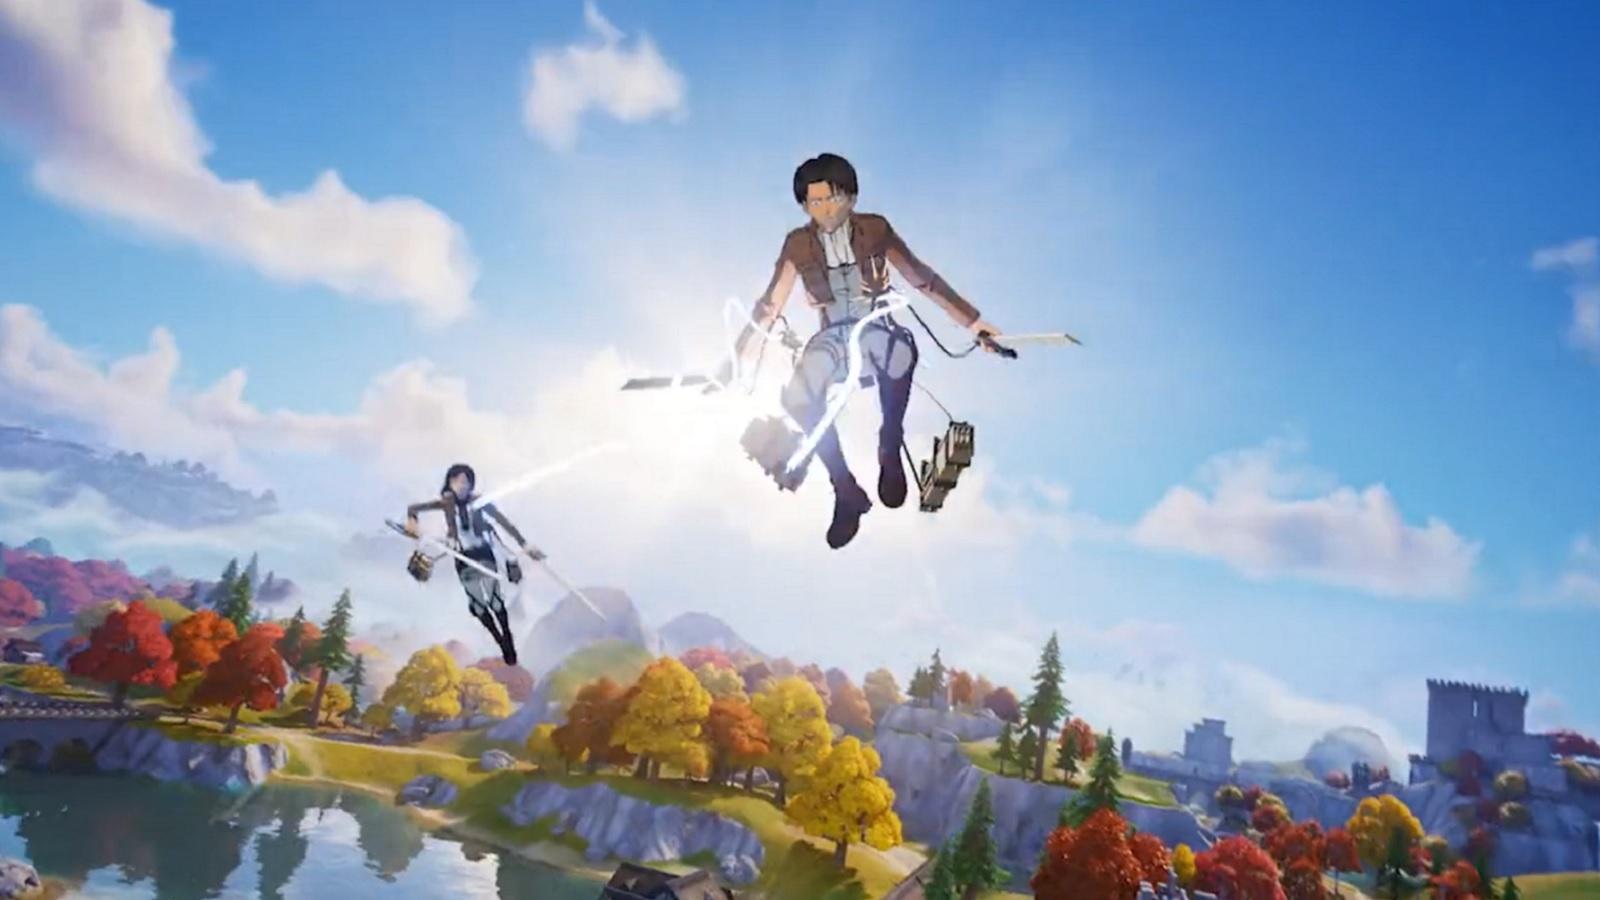 screenshot featuring the Mikasa and Levi skins in Fortnite from the Attack on Titan crossover.